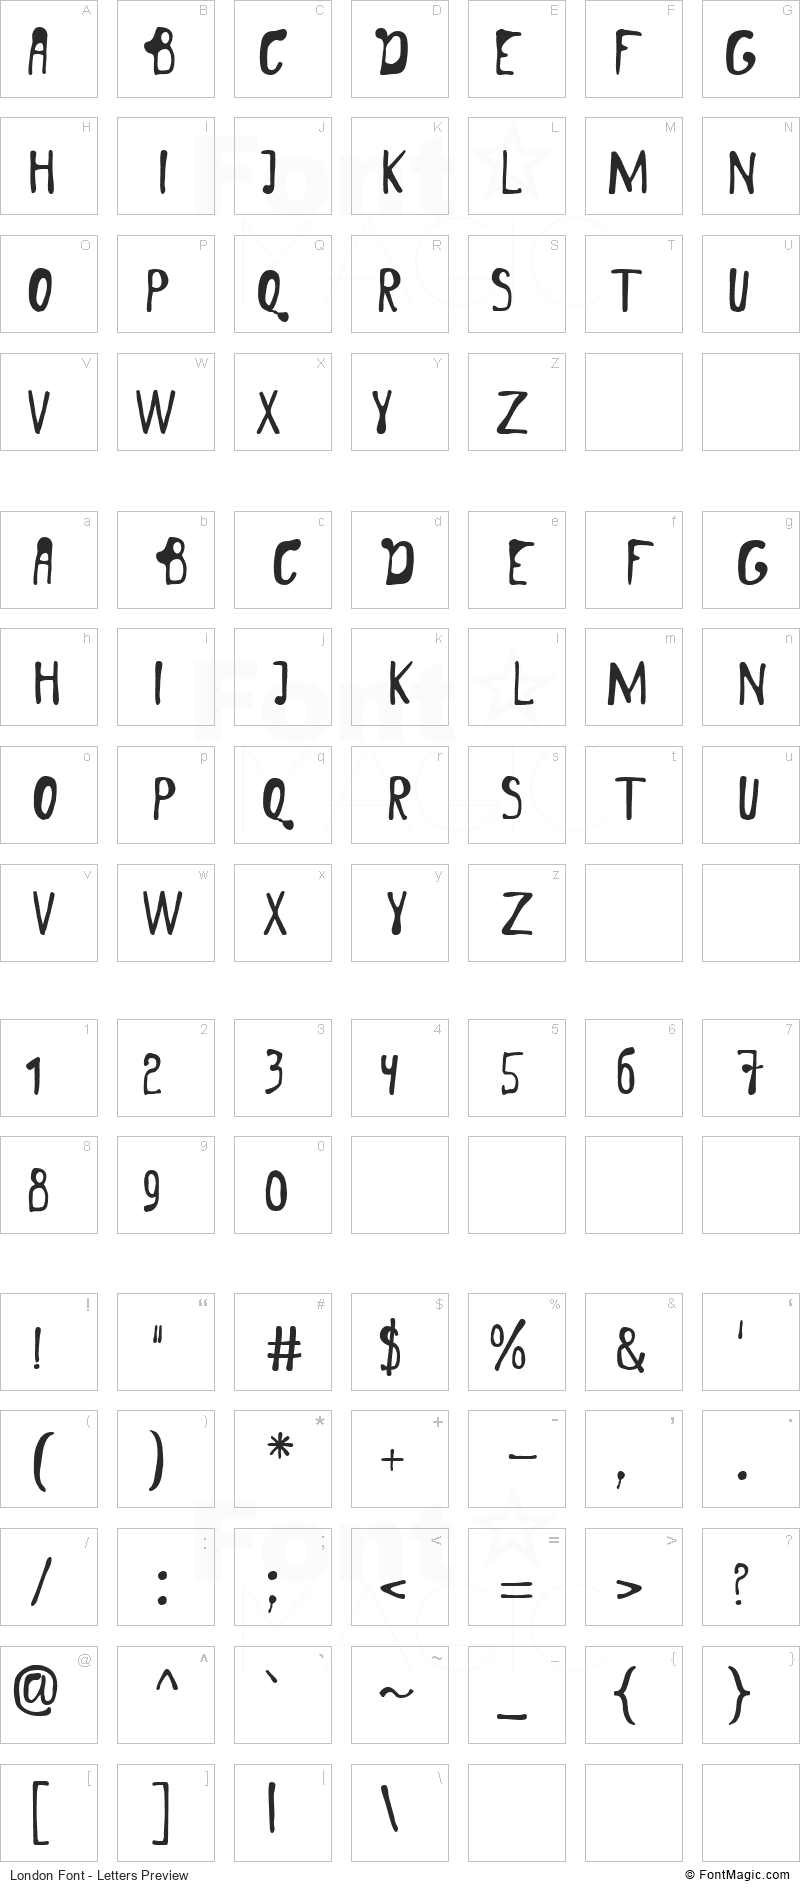 London Font - All Latters Preview Chart